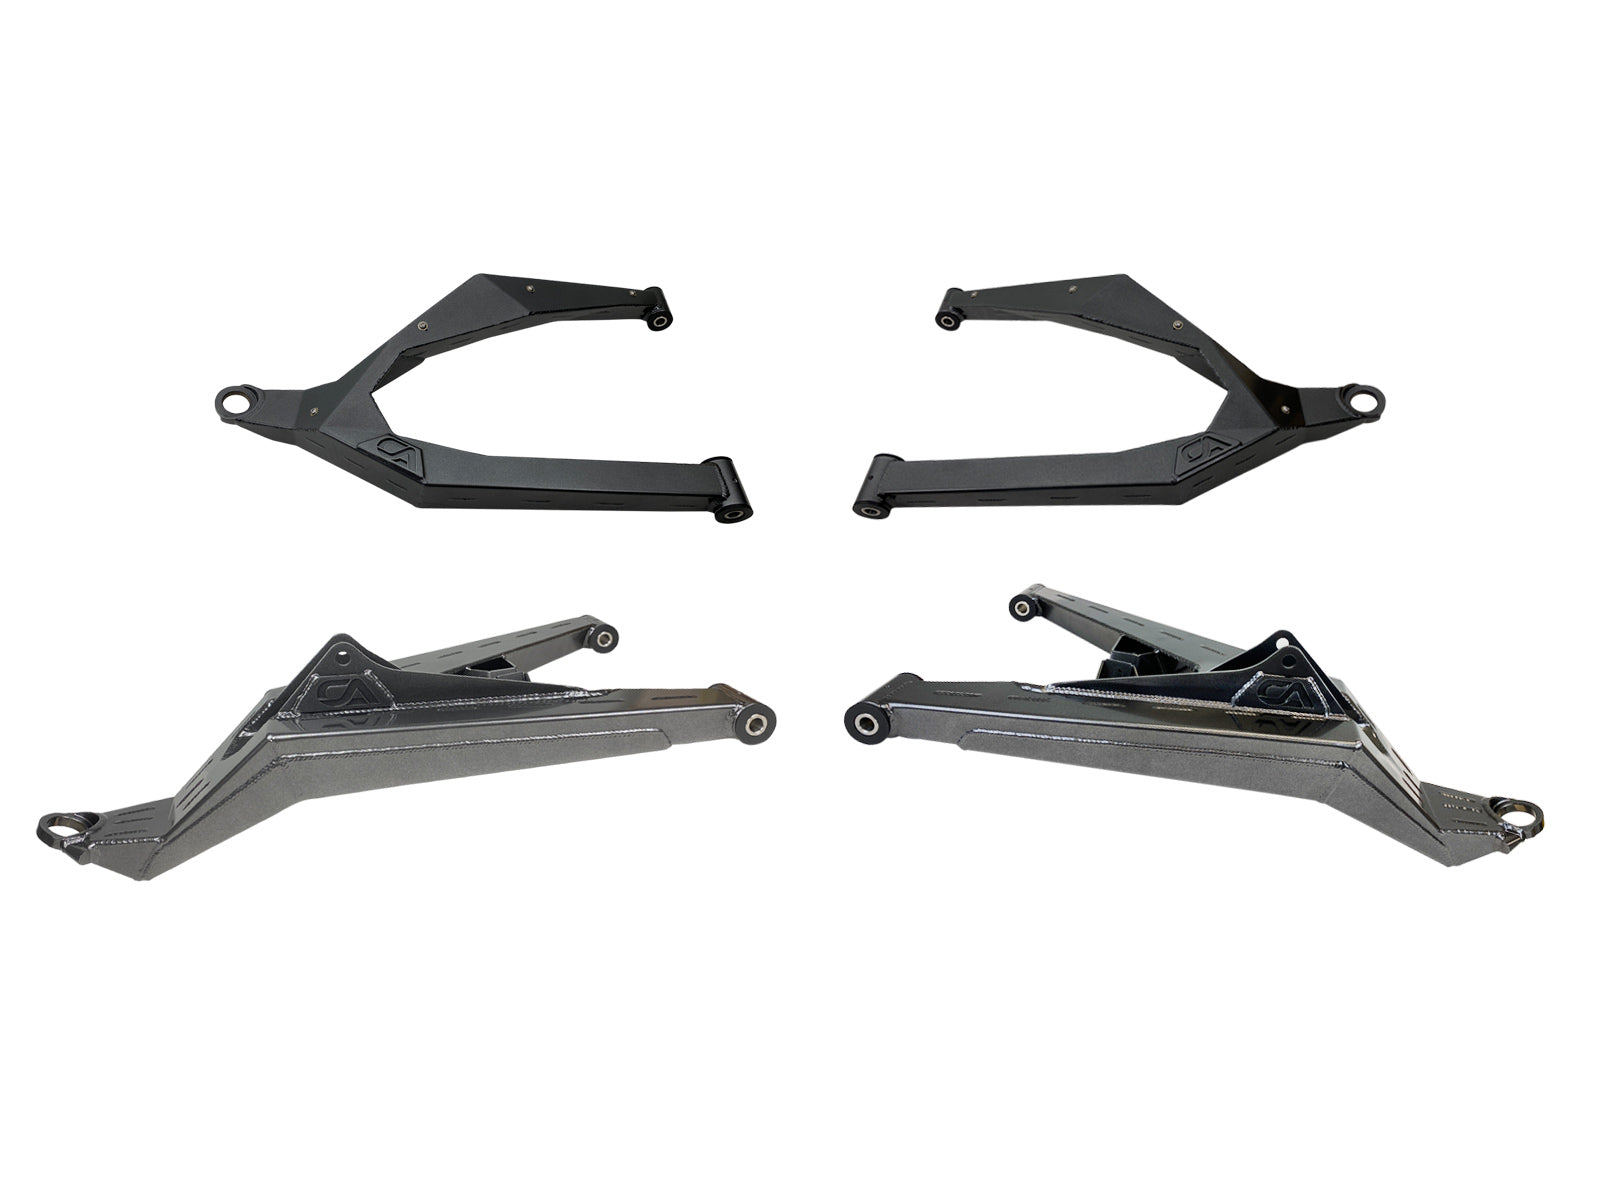 RZR Pro R and Turbo R High Clearance Control Arms